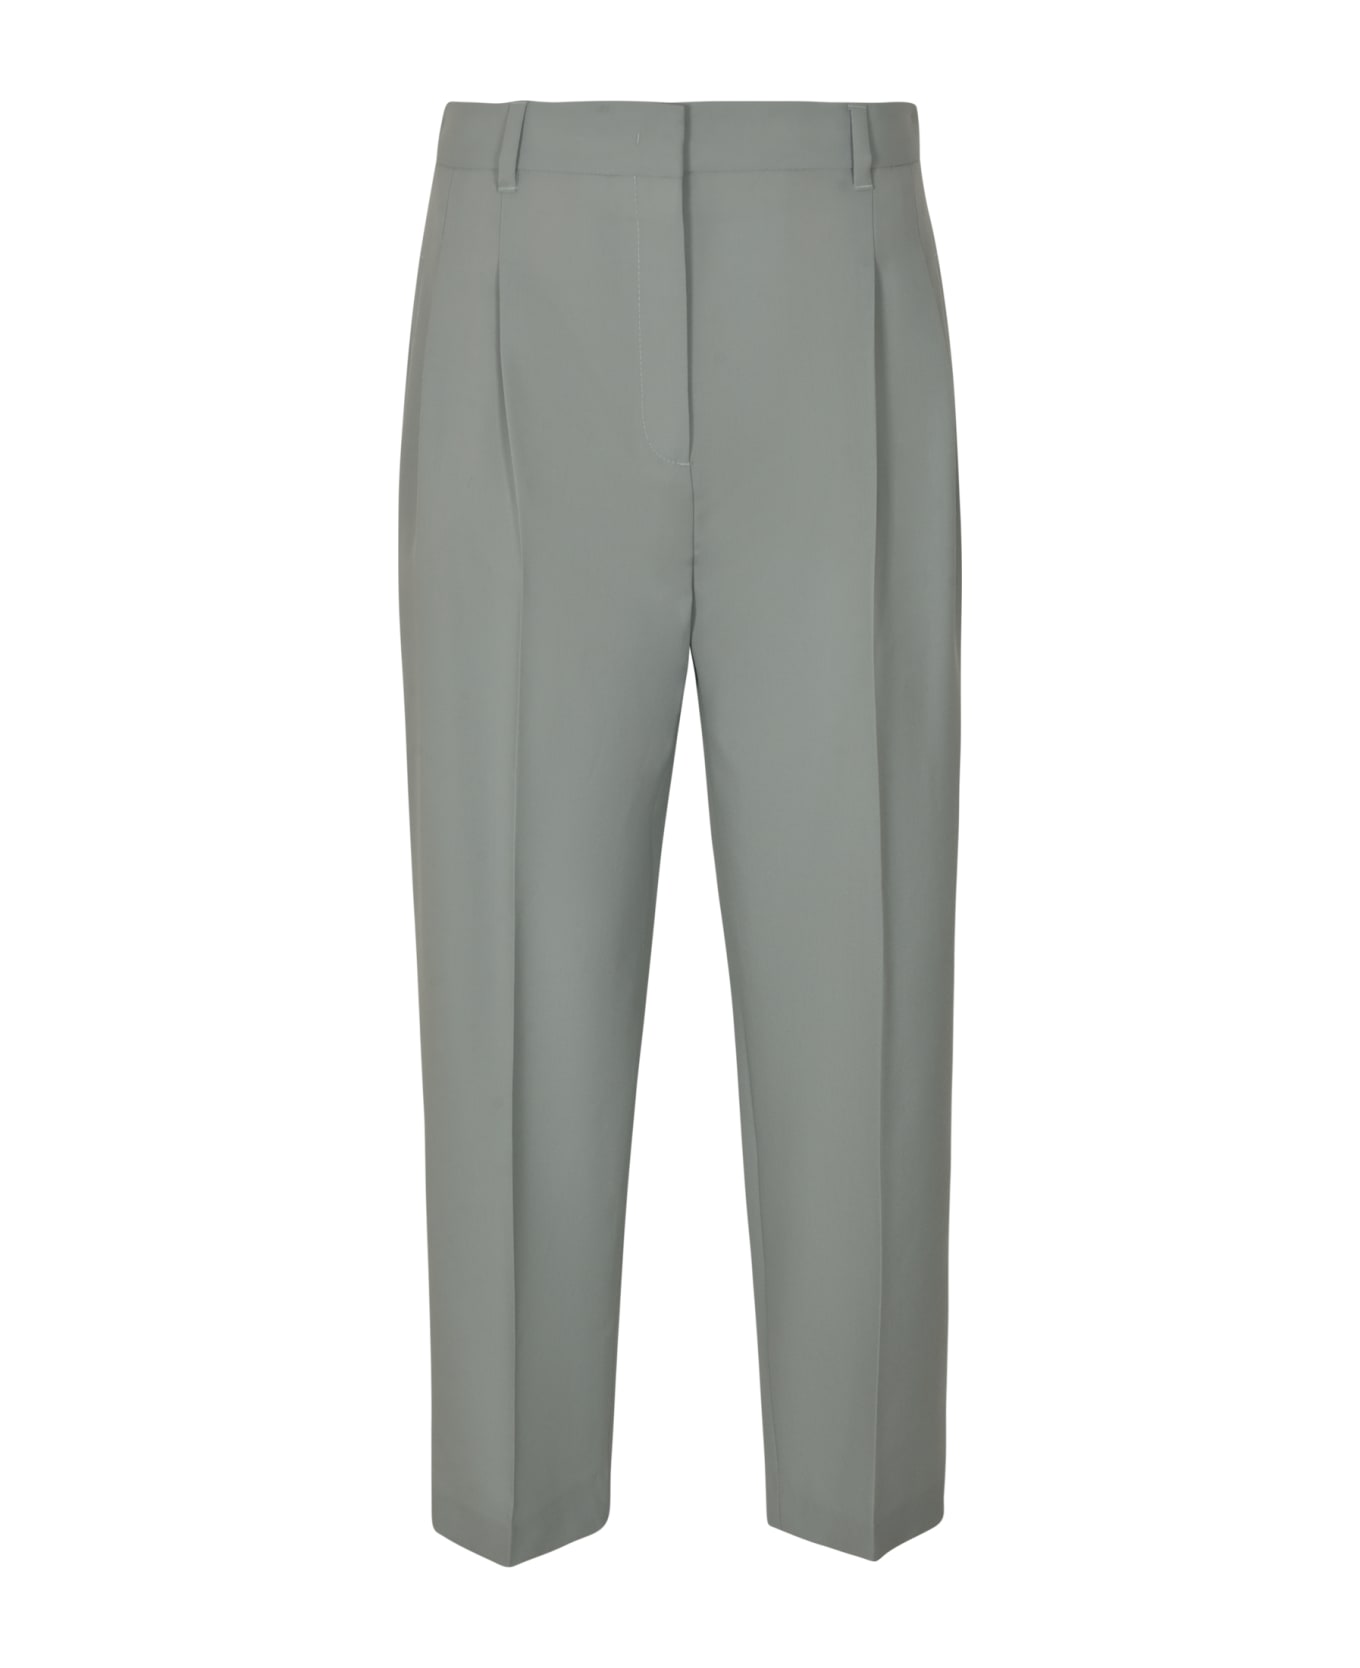 Paul Smith Pleat Effect Plain Cropped Trousers - Emerald ボトムス